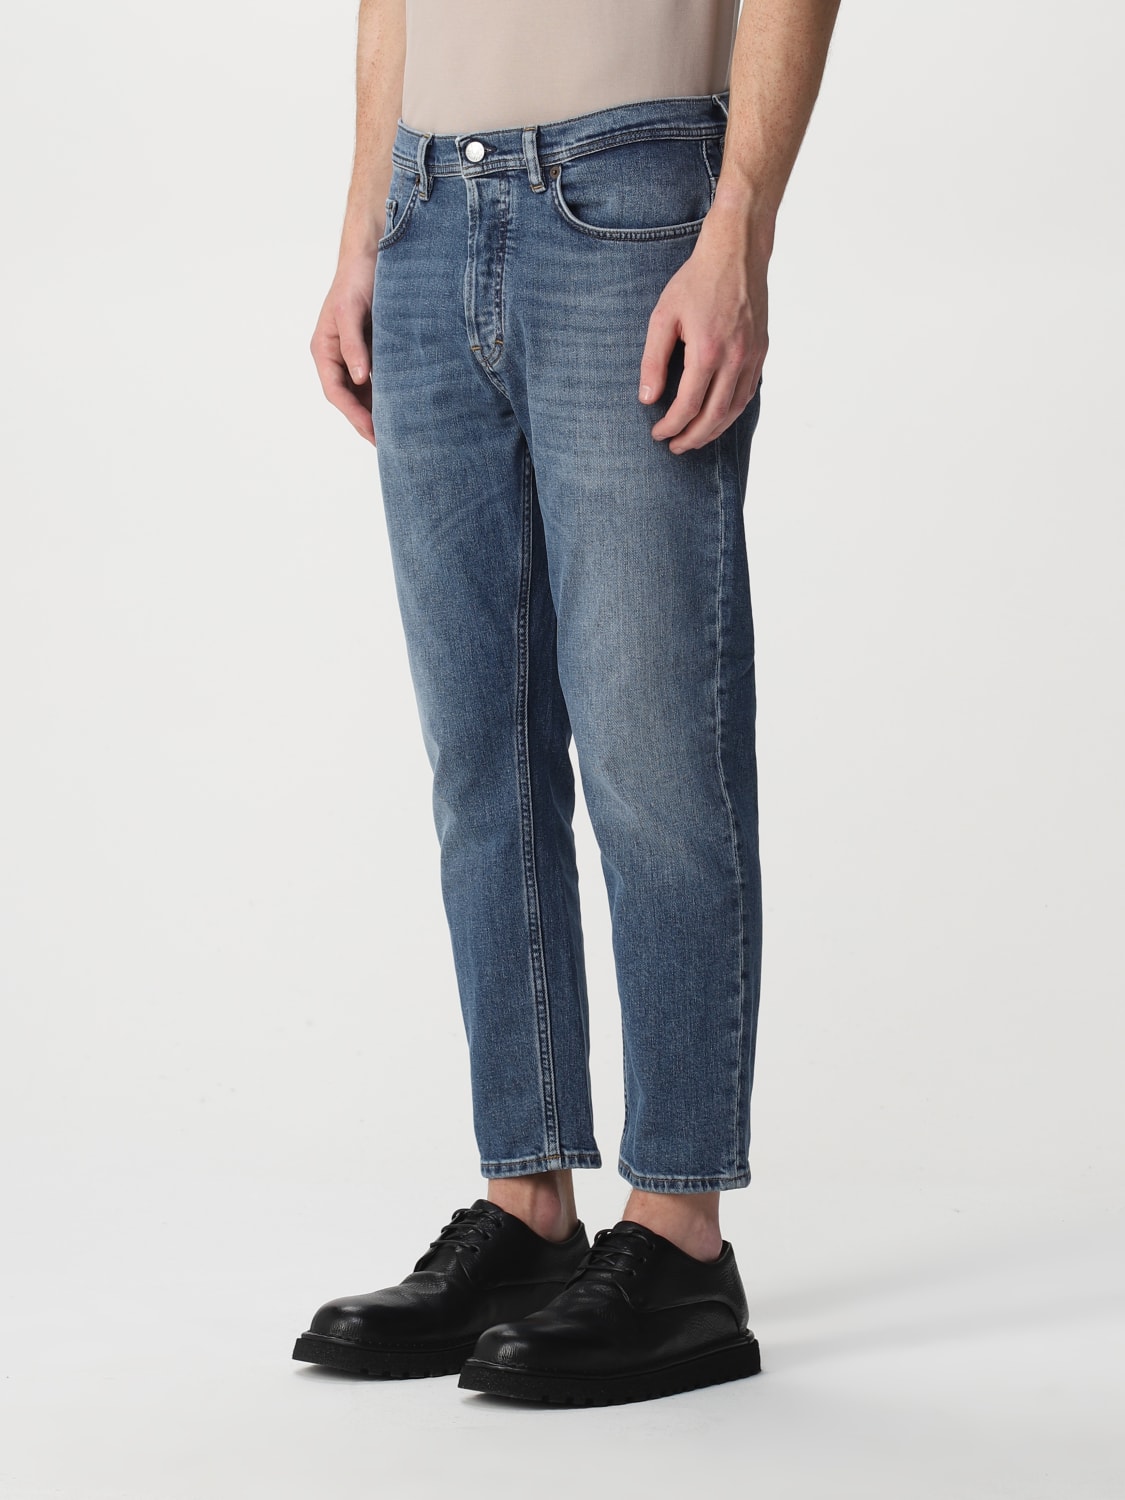 ACNE STUDIOS: cropped jeans in washed denim Blue | Acne Studios B00174 online at